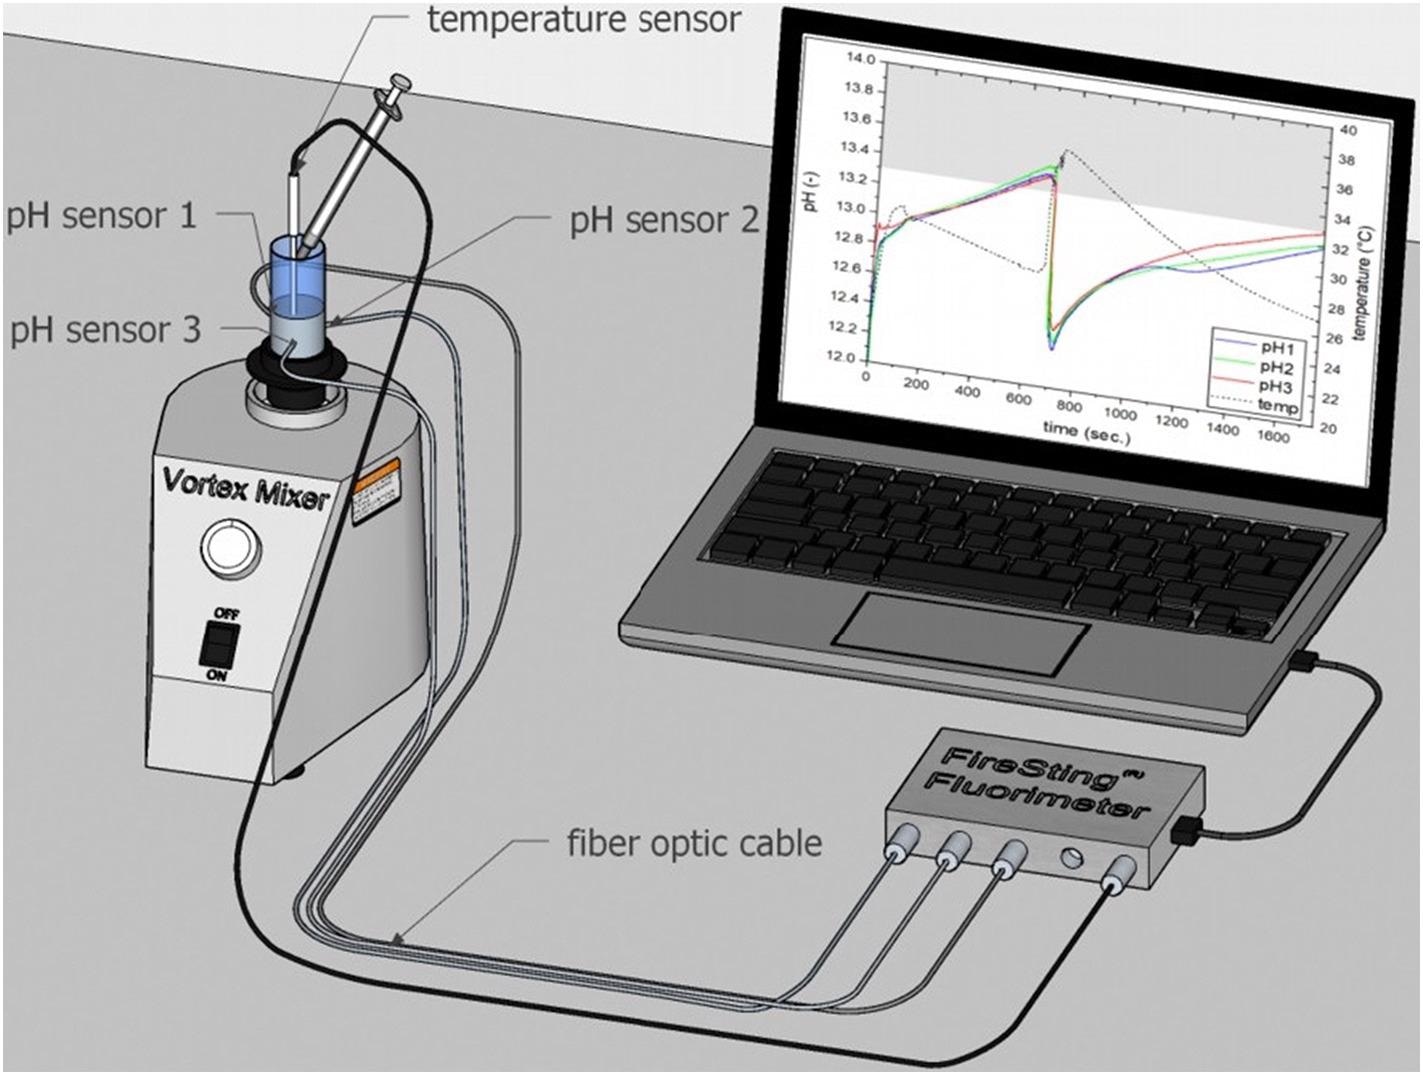 Test setup for continuous pH measurement in paste samples. Figure was drawn with Sketch Up Pro 2021 software tool and integrated 3D warehouse database.